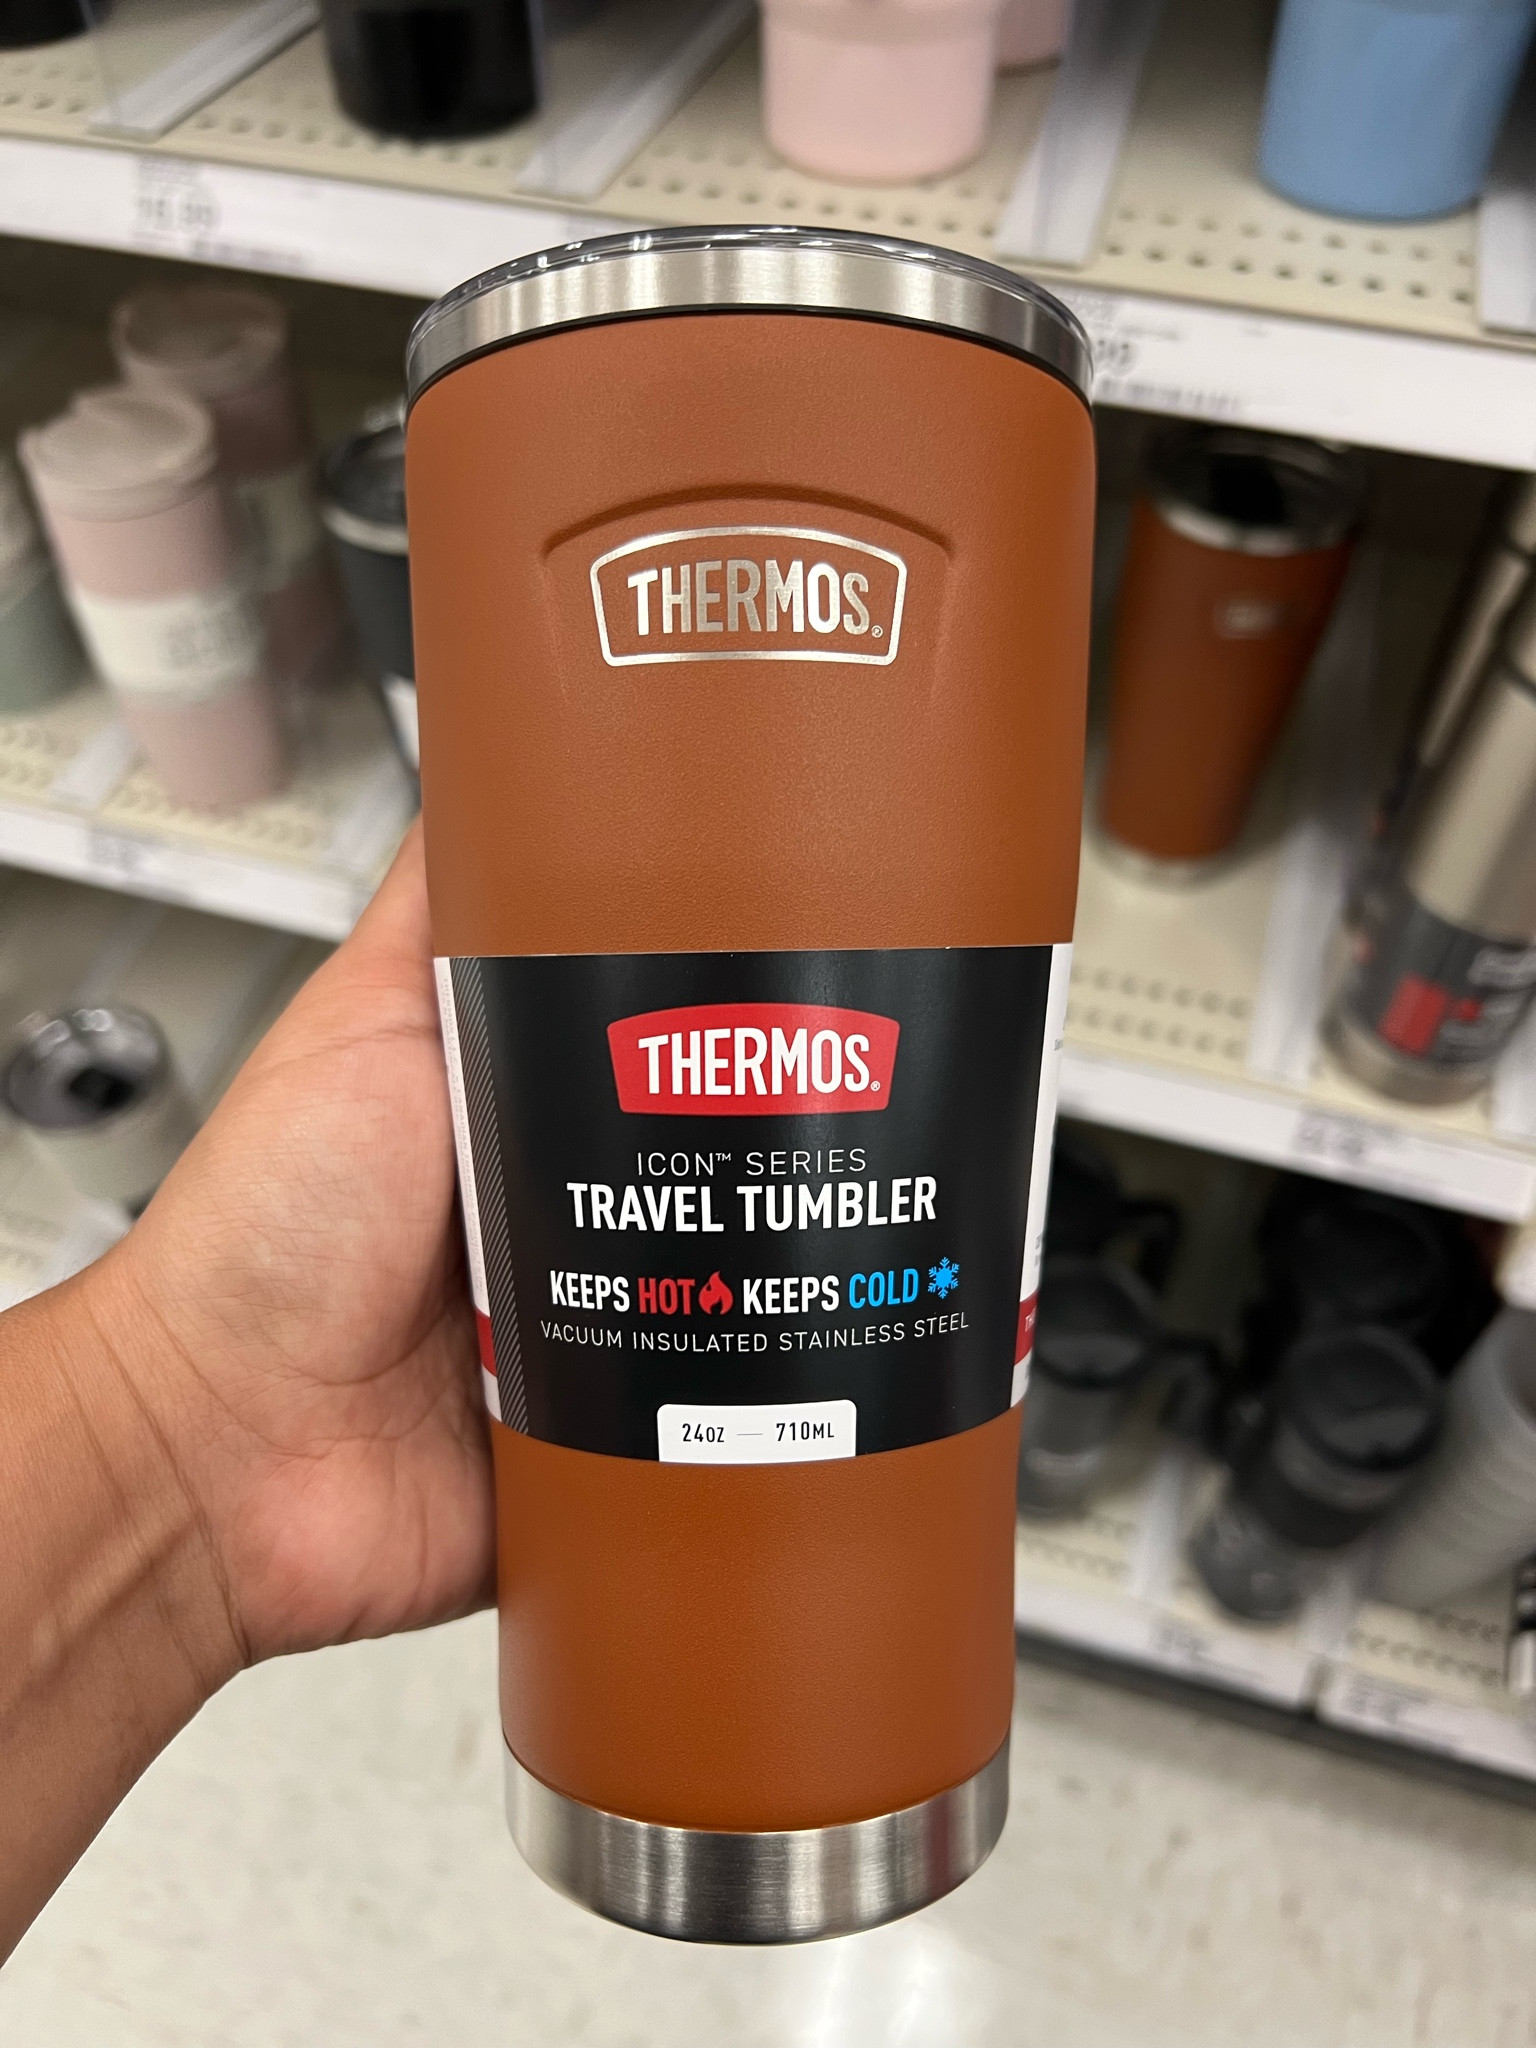 Thermos 24 Oz. Stainless Steel Vacuum Insulated Wide Mouth Tumbler